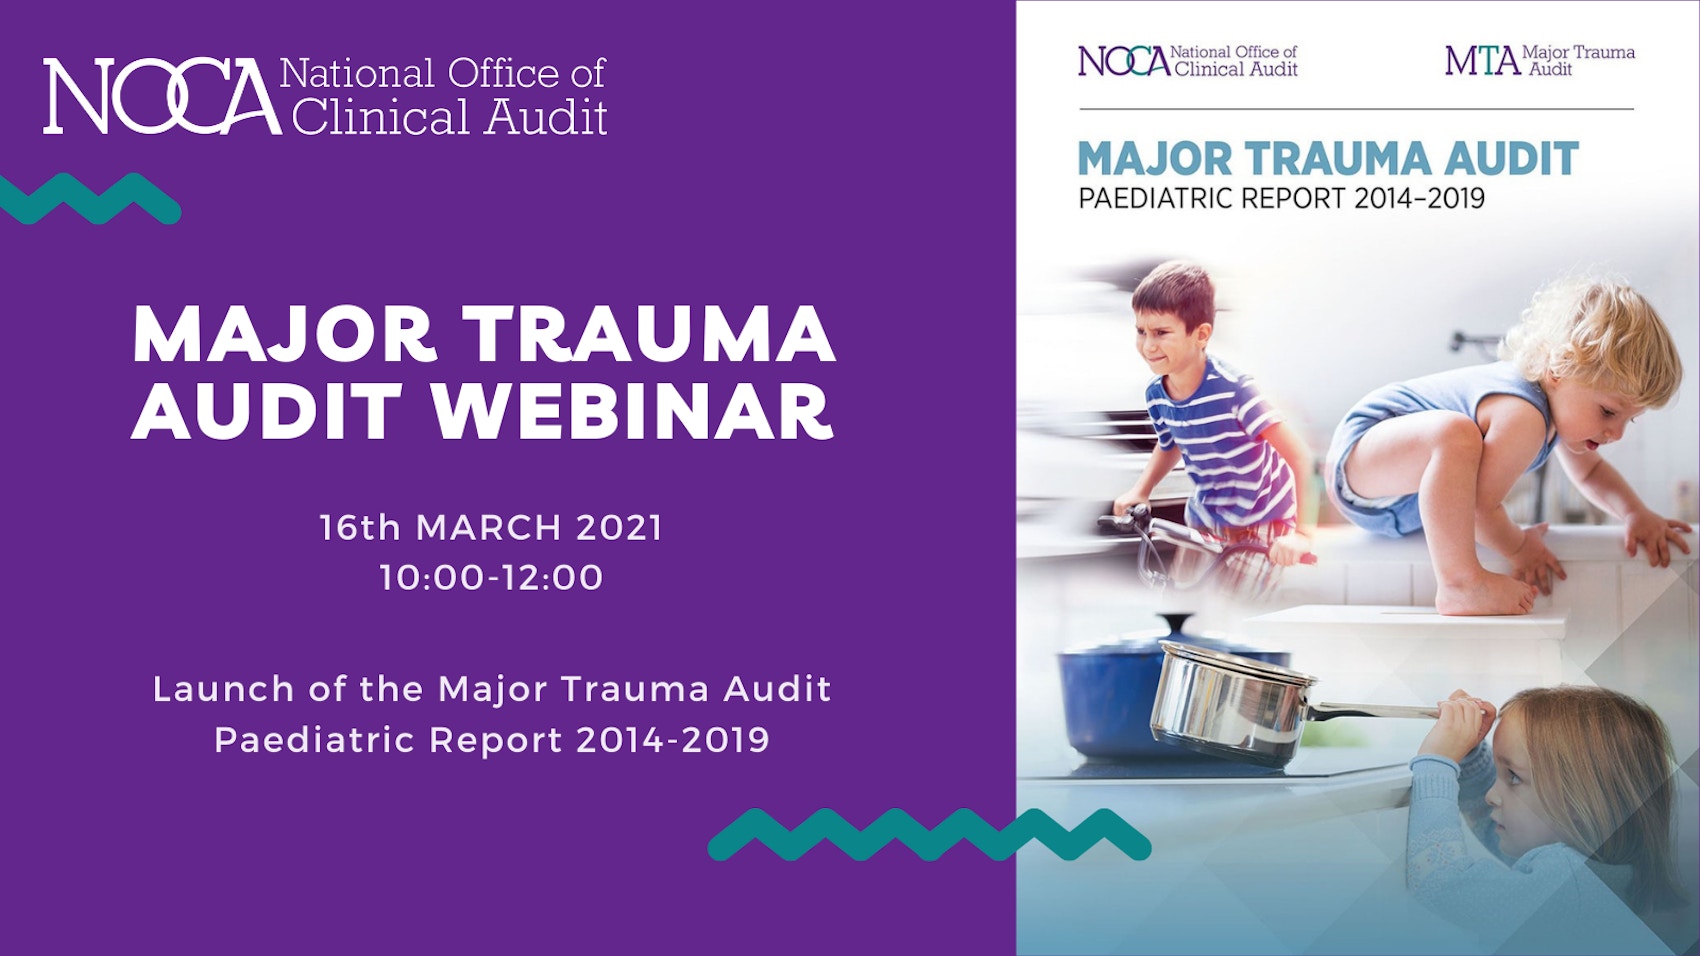 Injury prevention is key - launch of the Major Trauma Audit Paediatric Report 2014-2019